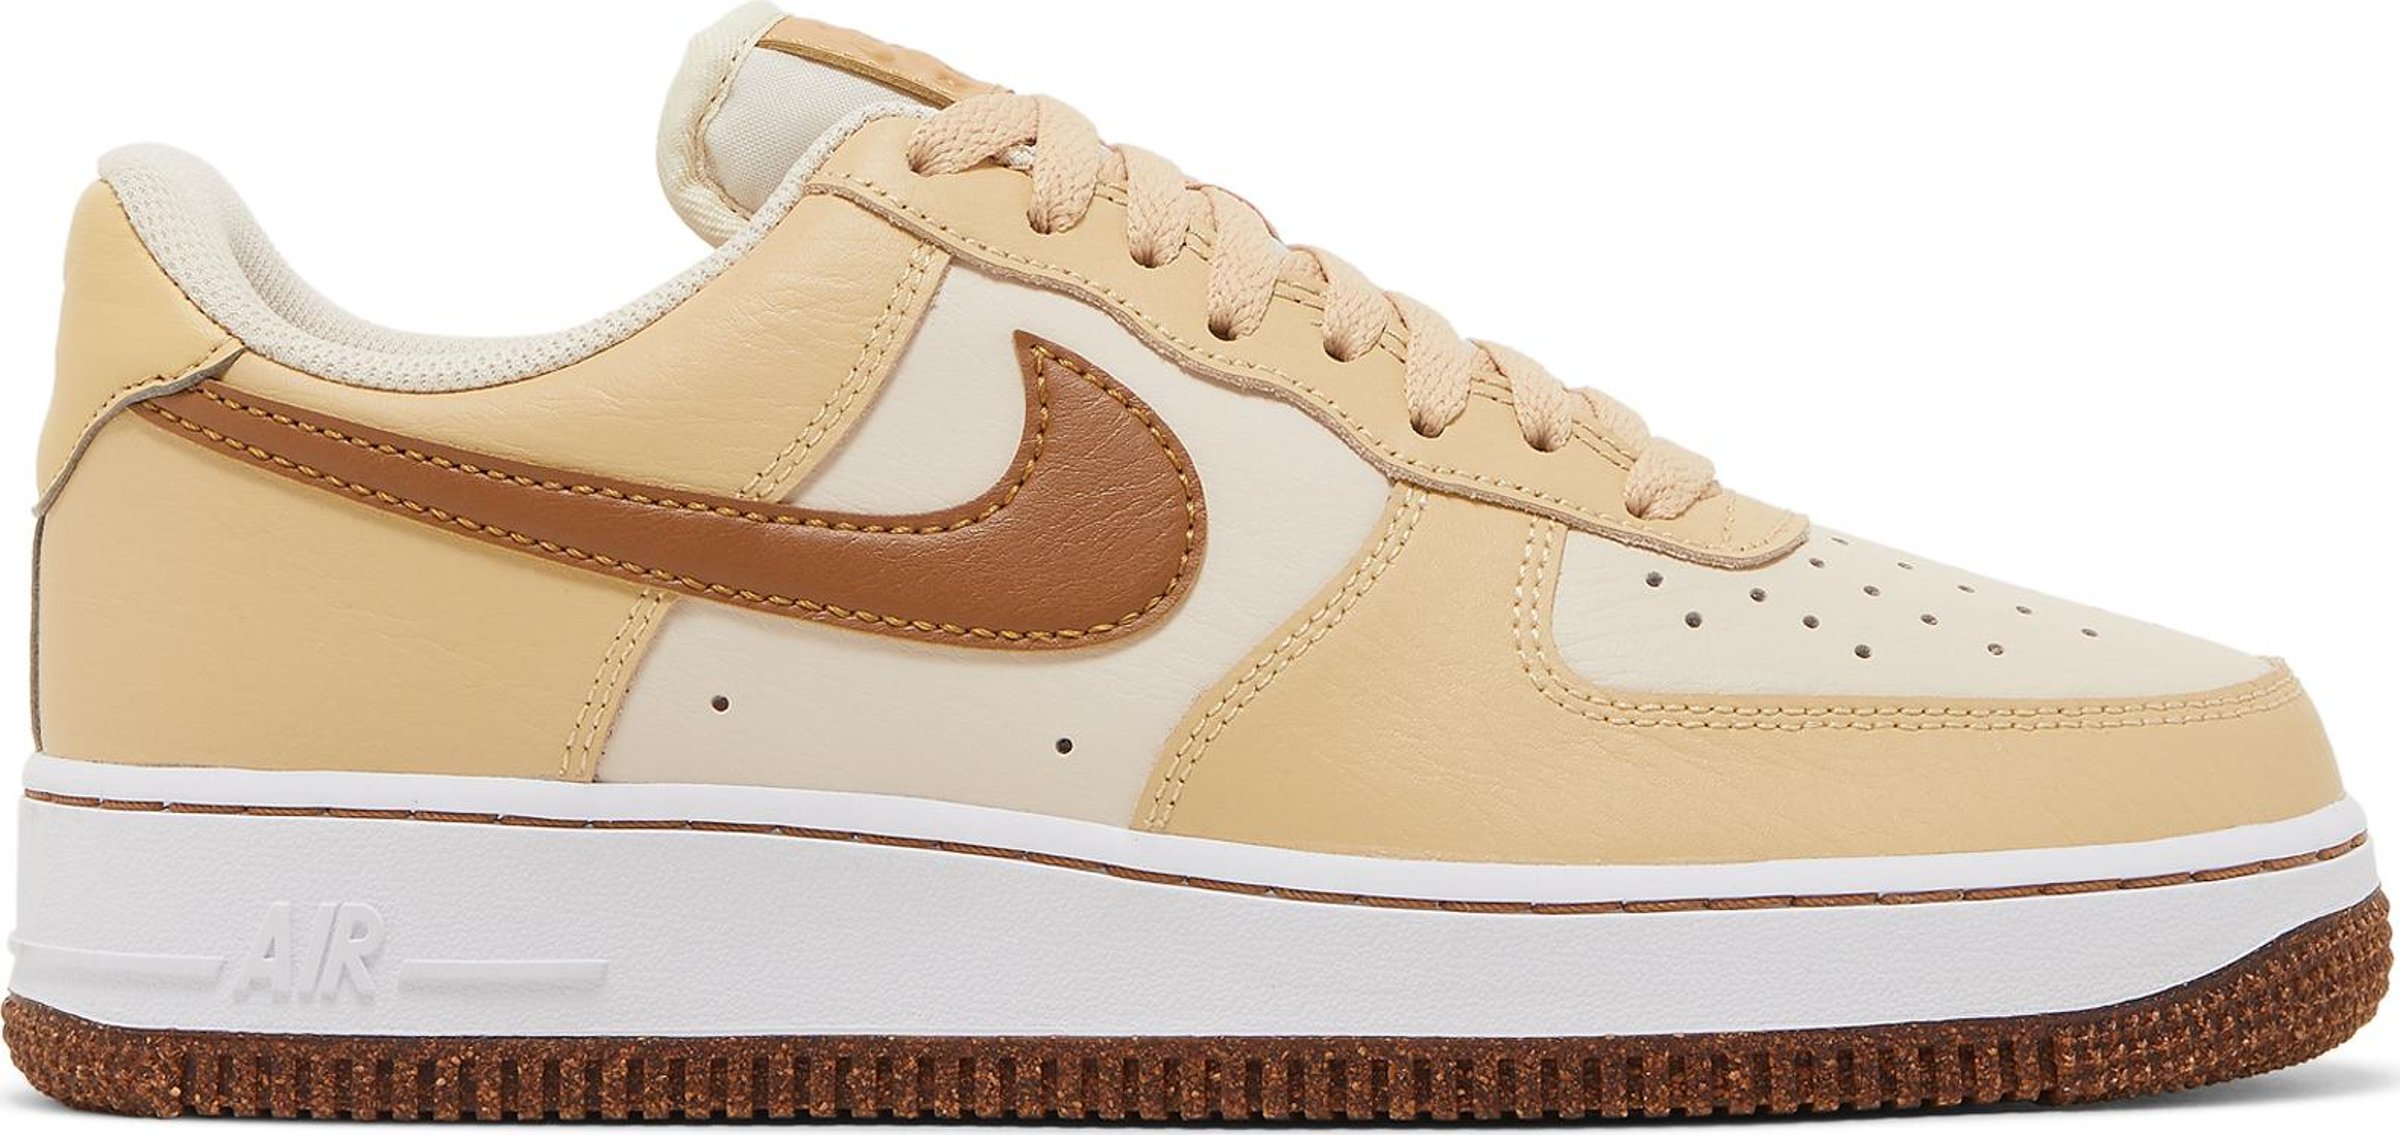 Buy Air Force 1 '07 LV8 EMB 'Inspected By Swoosh' - DQ7660 200 - Brown ...